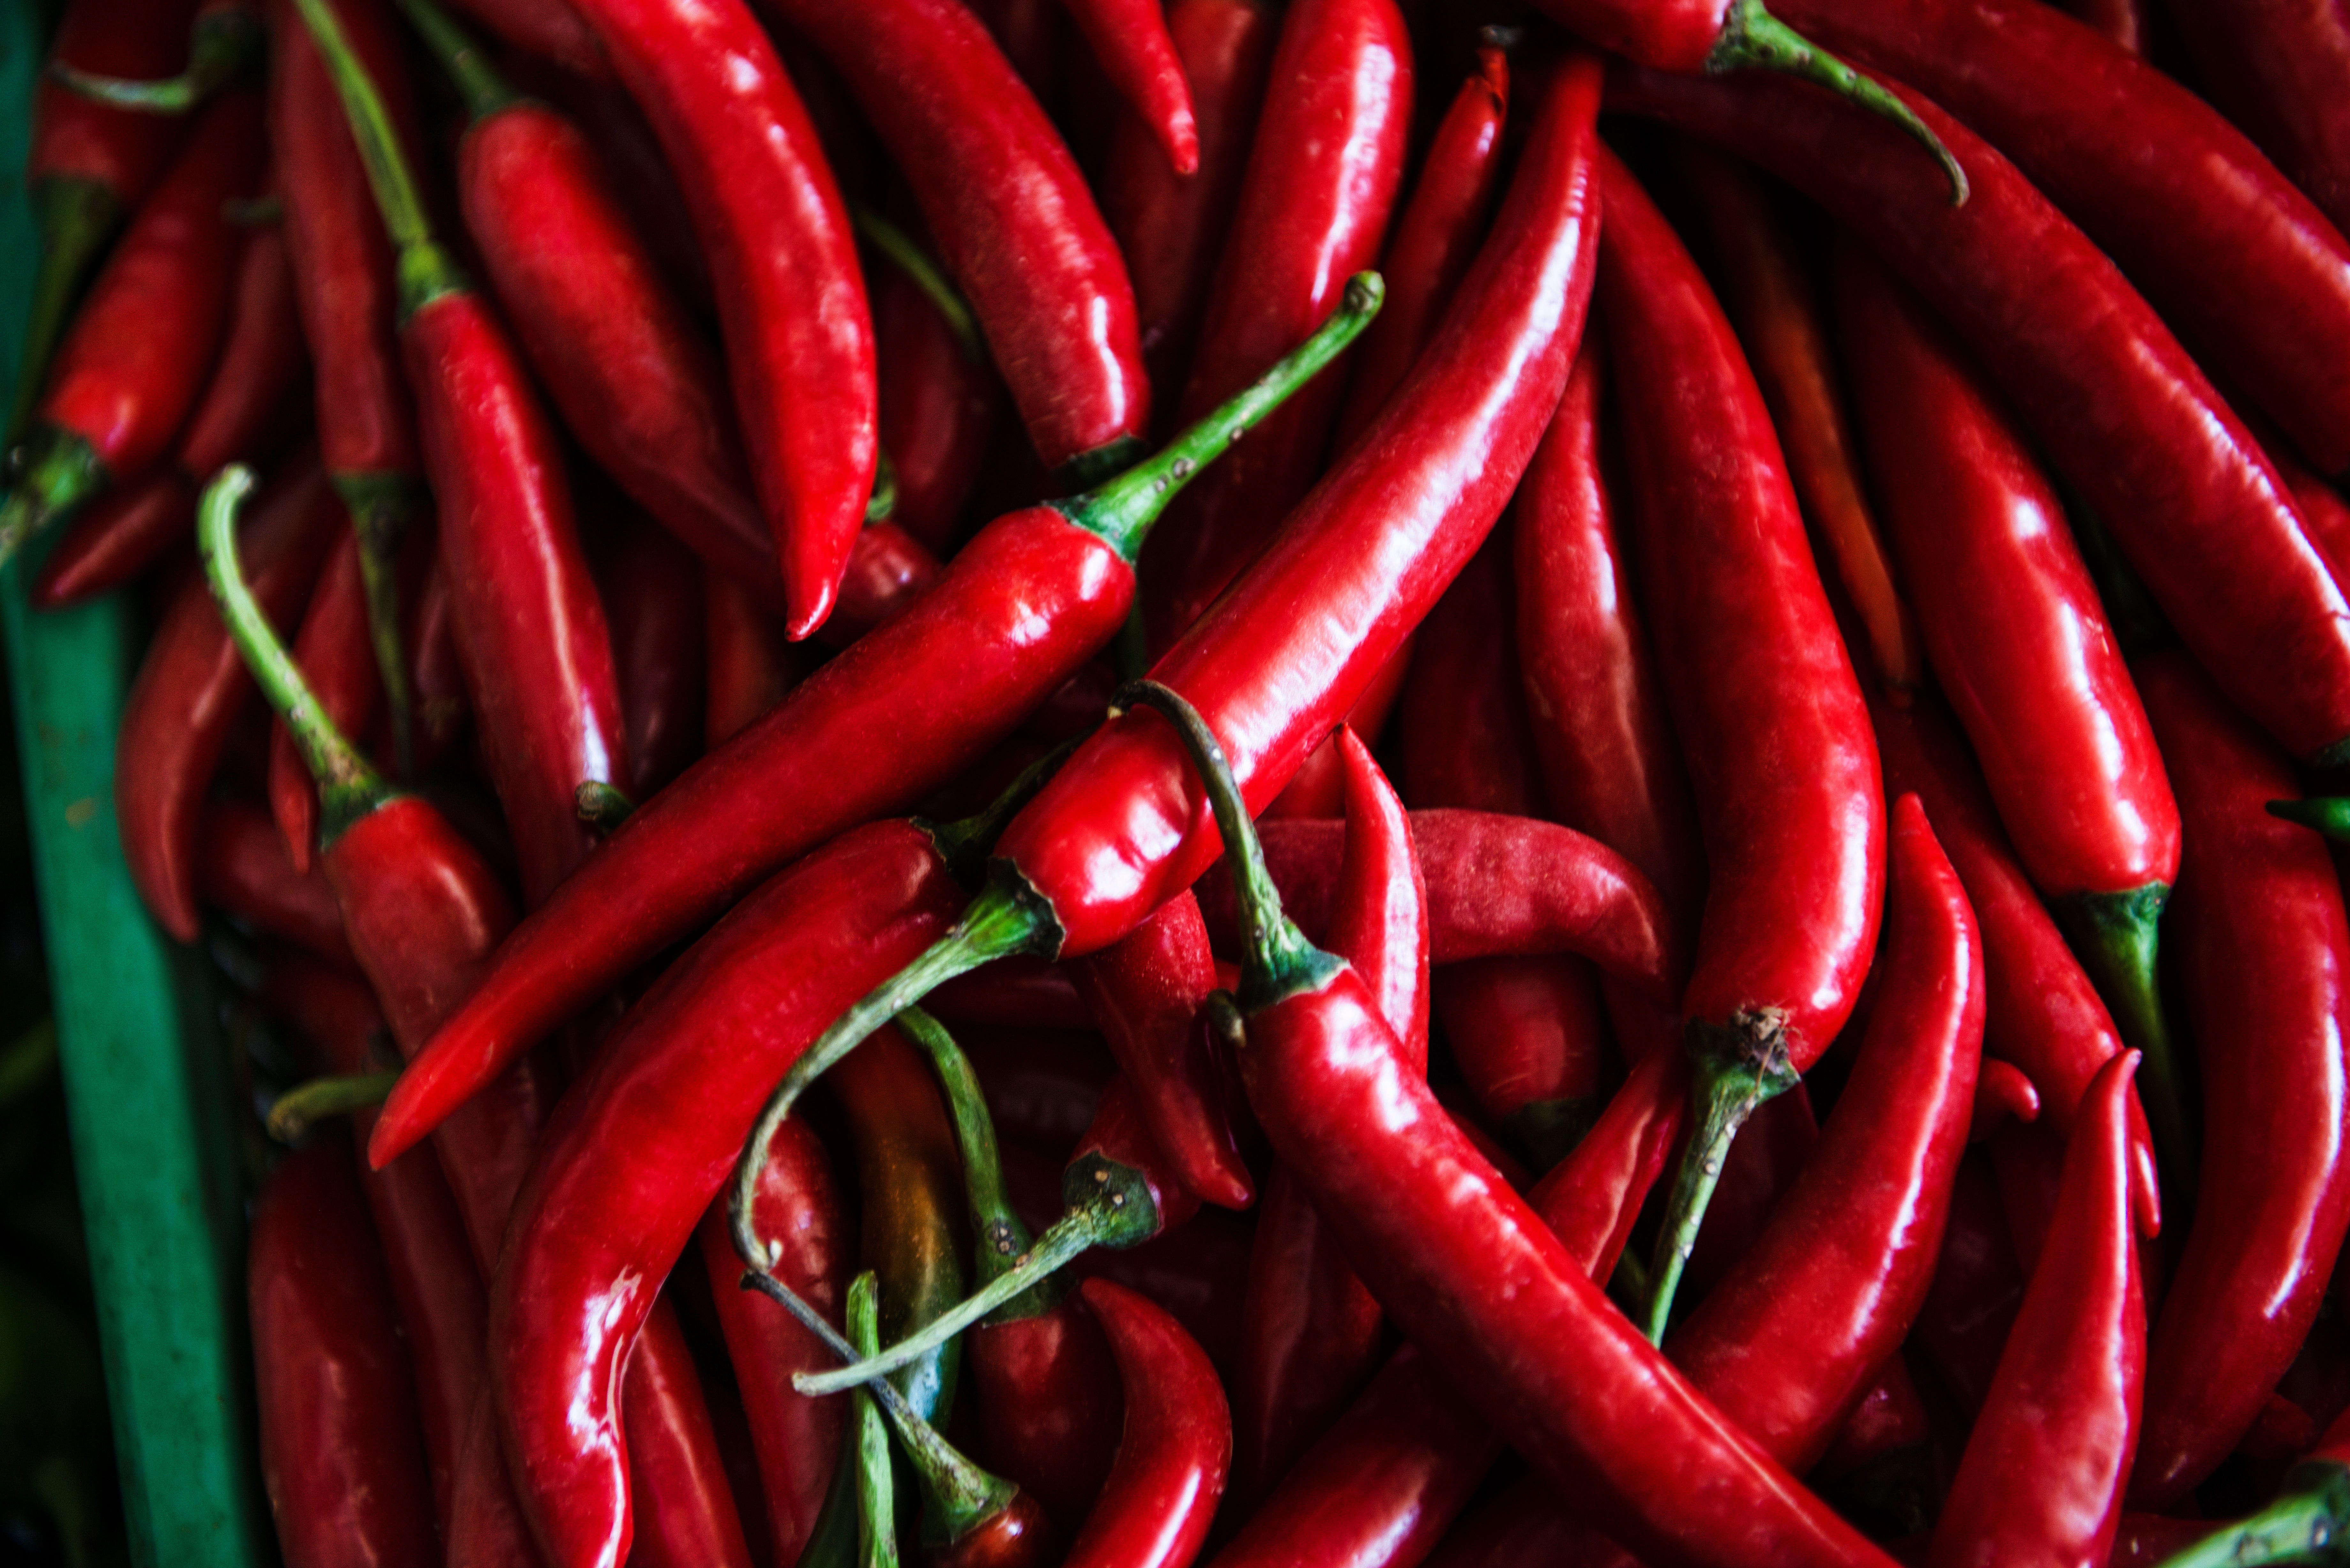 Spicy Food Might Help You Live Longer